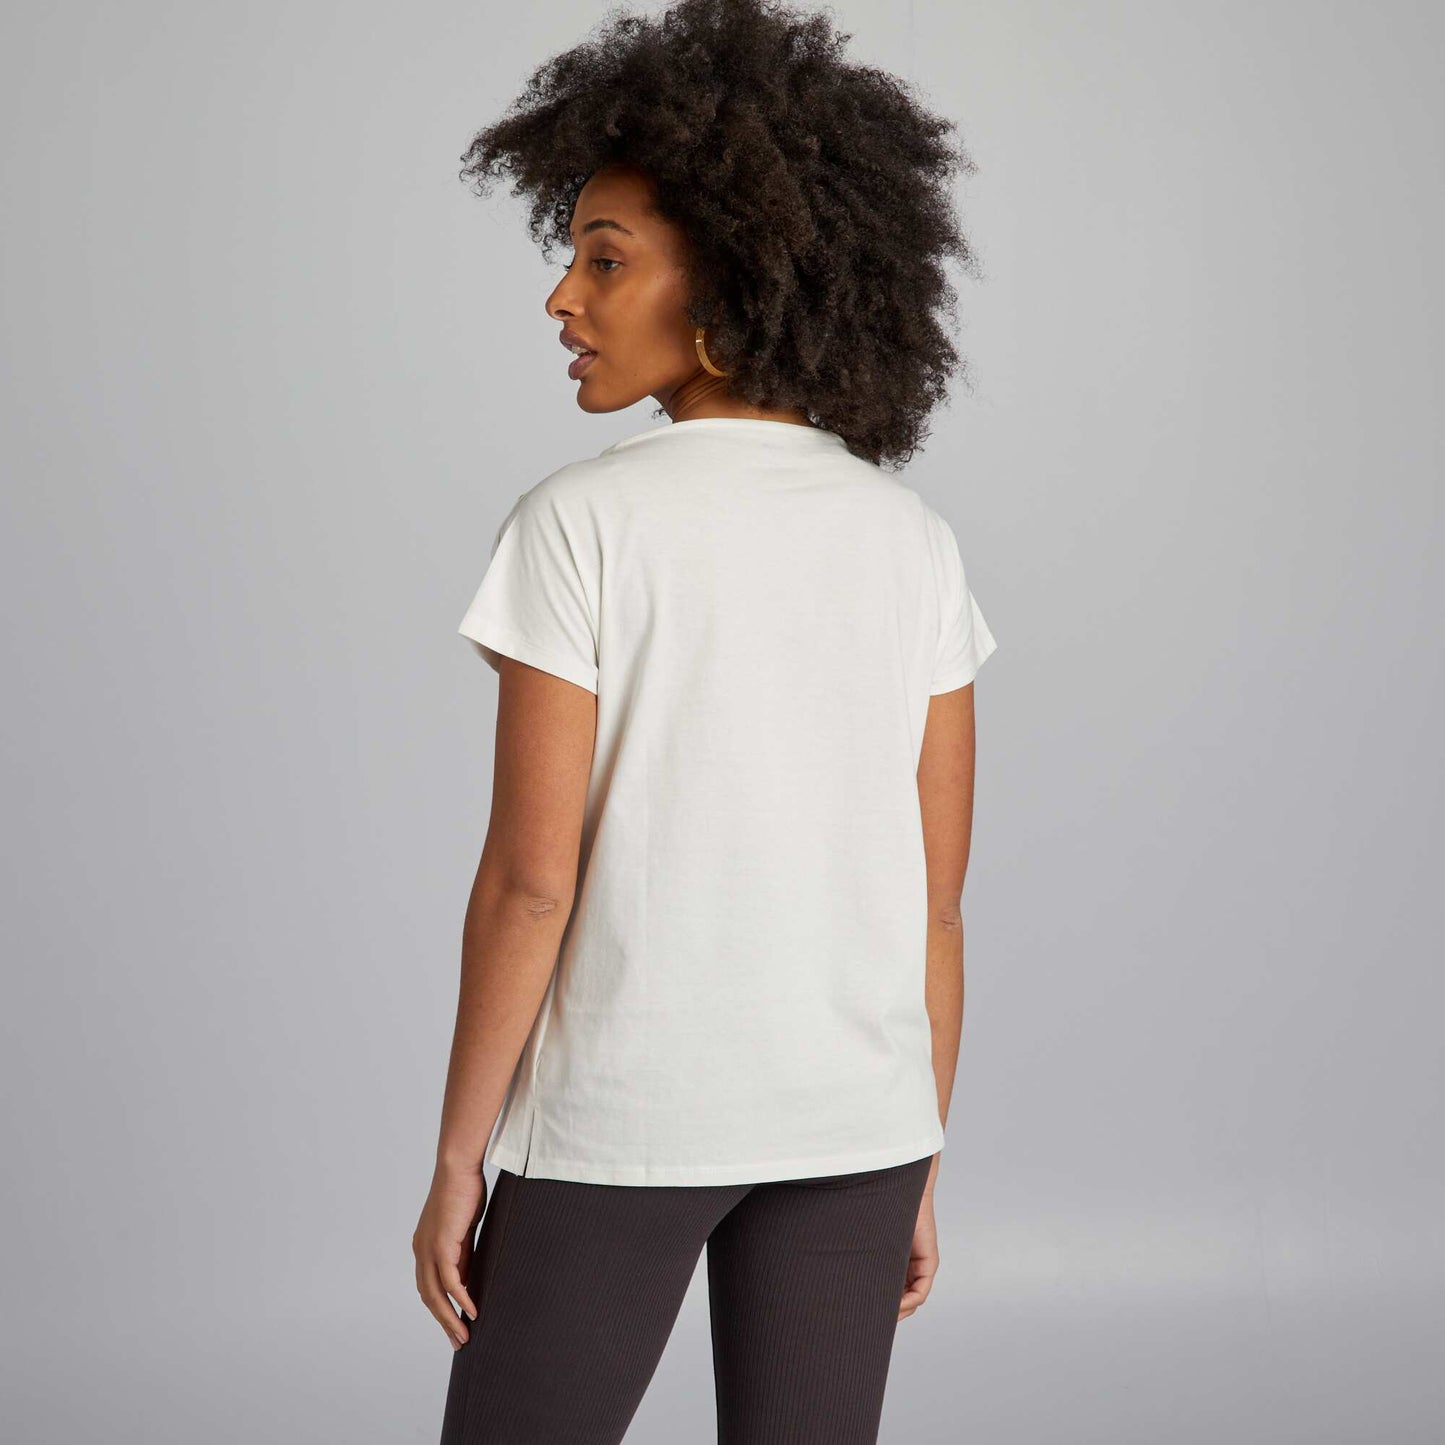 Nursing T-shirt with buttoned collar WHITE